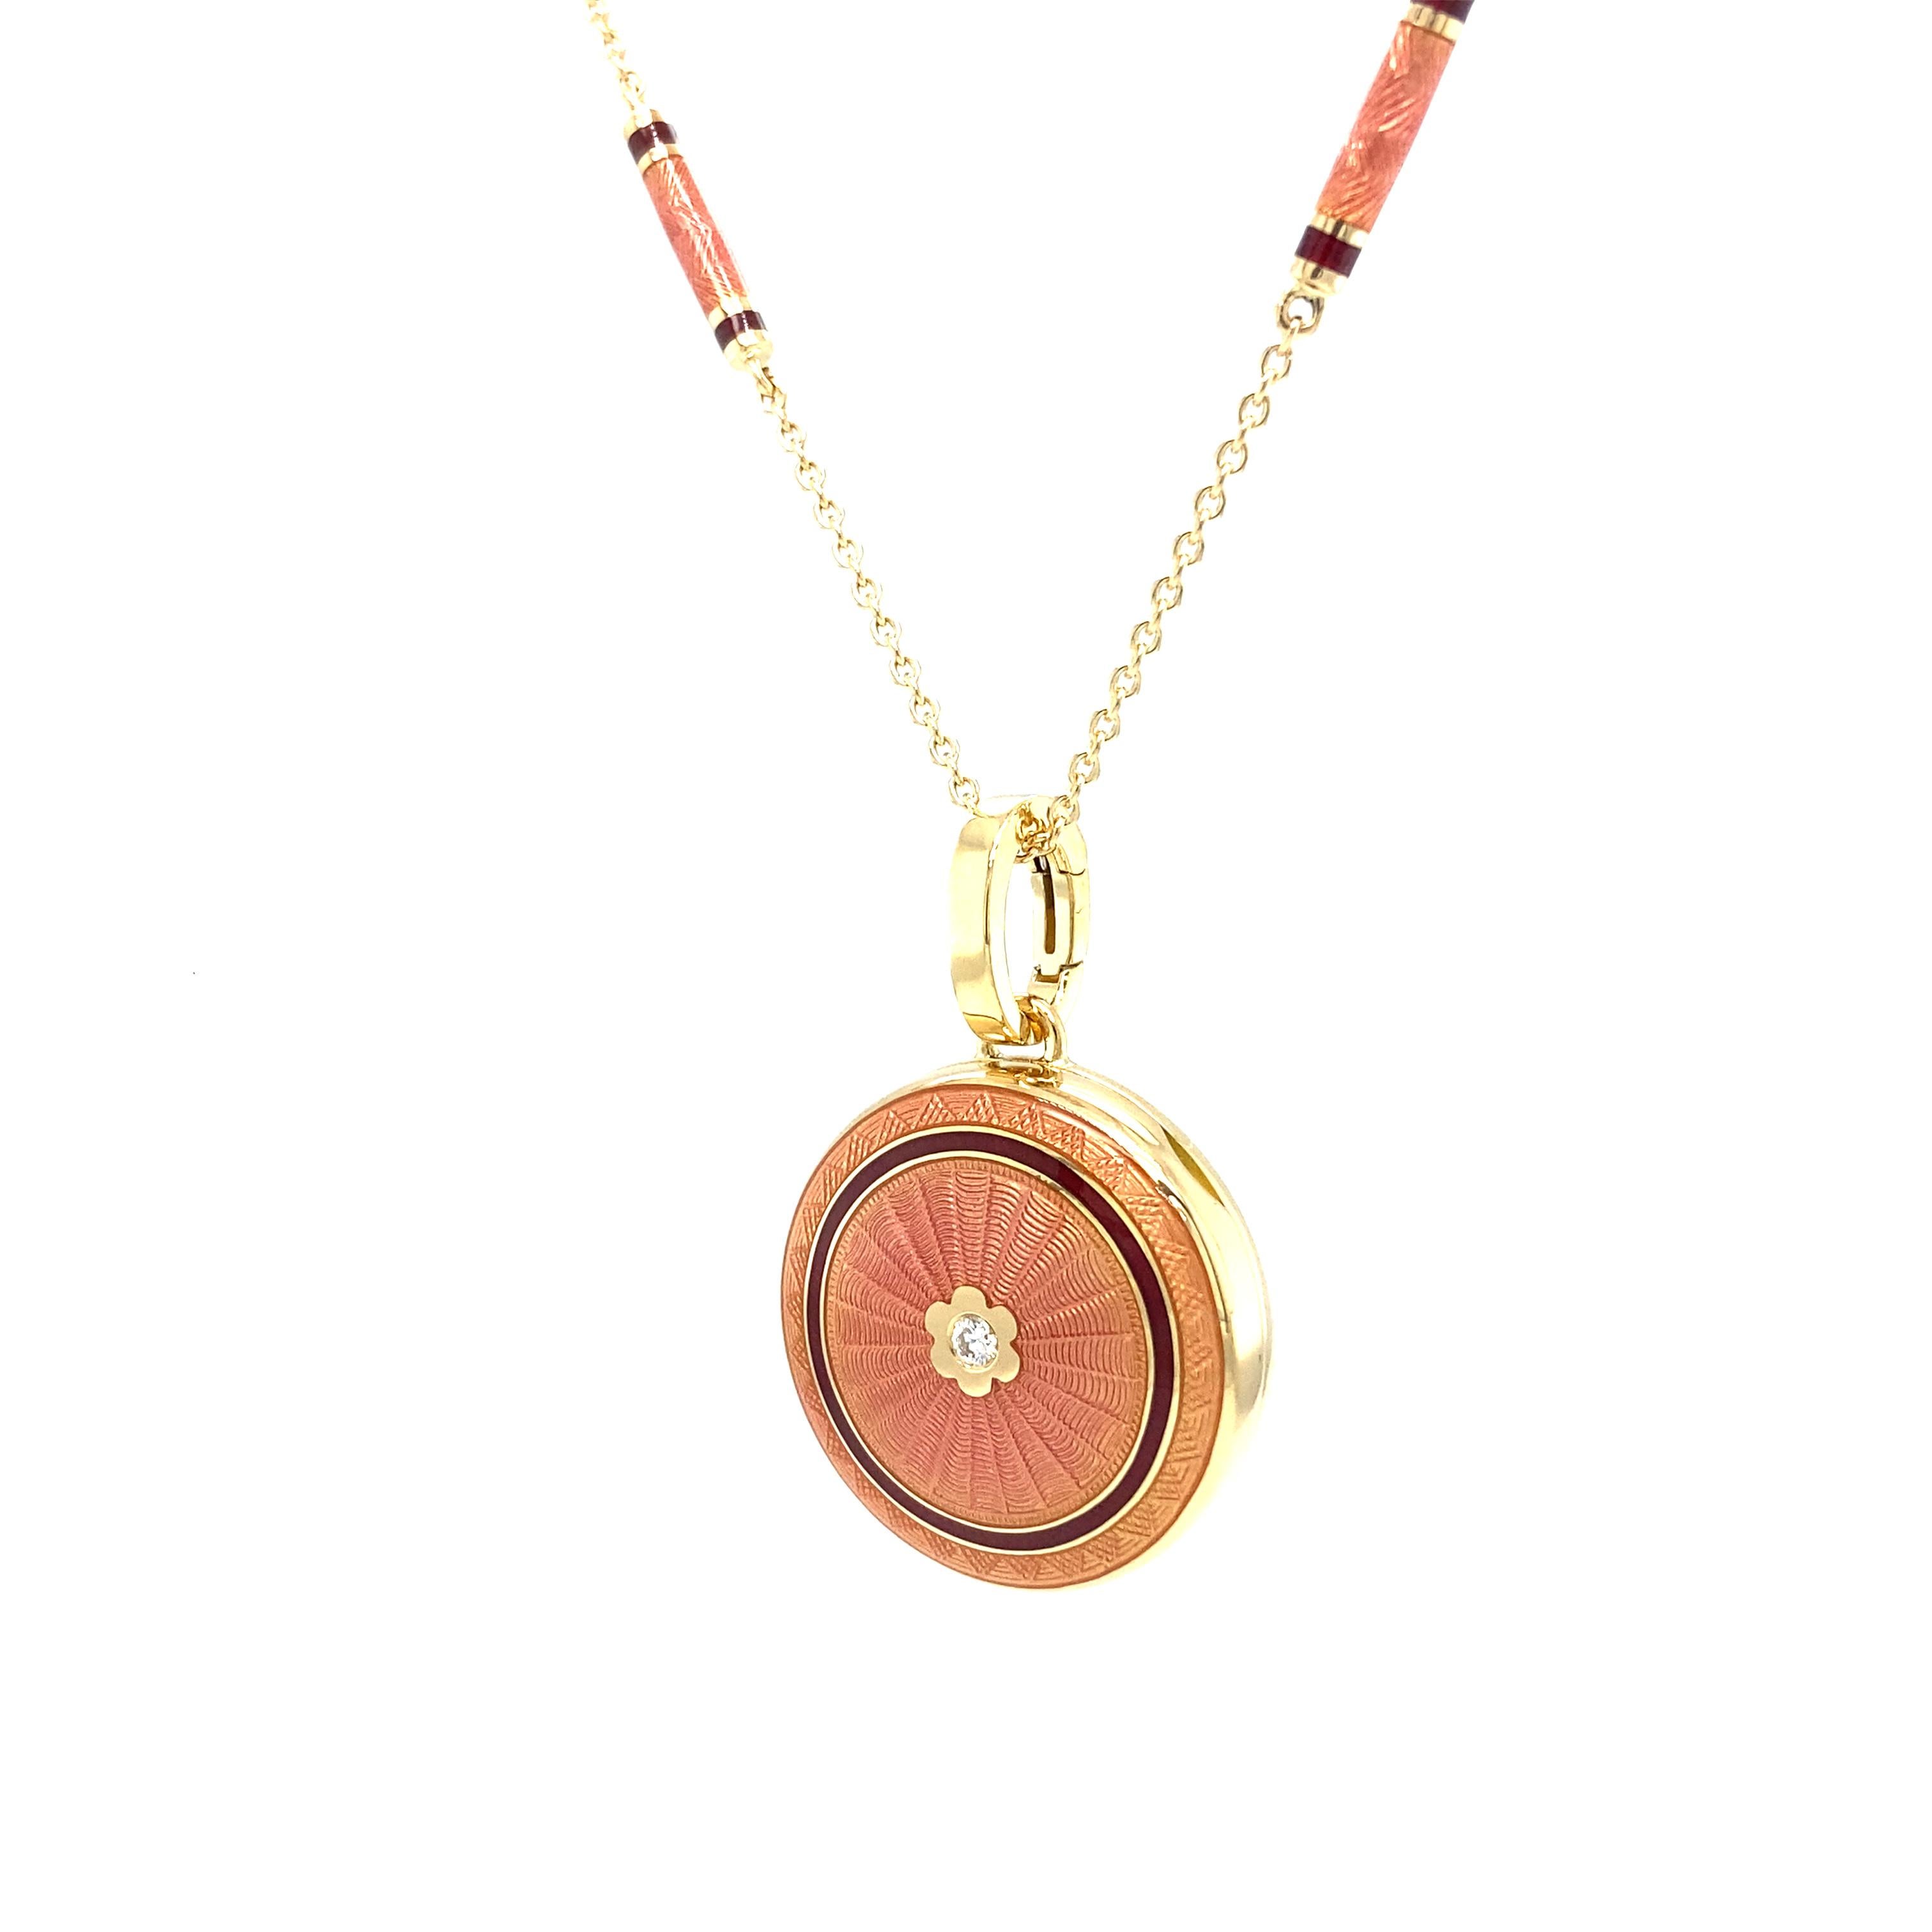 Victor Mayer round locket pendant necklace in 18k yellow gold with pink and burgundy red vitreous enamel and 1 brilliant cut diamond total 0.03 ct, H VS

About the creator Victor Mayer 
Victor Mayer is internationally renowned for elegant timeless